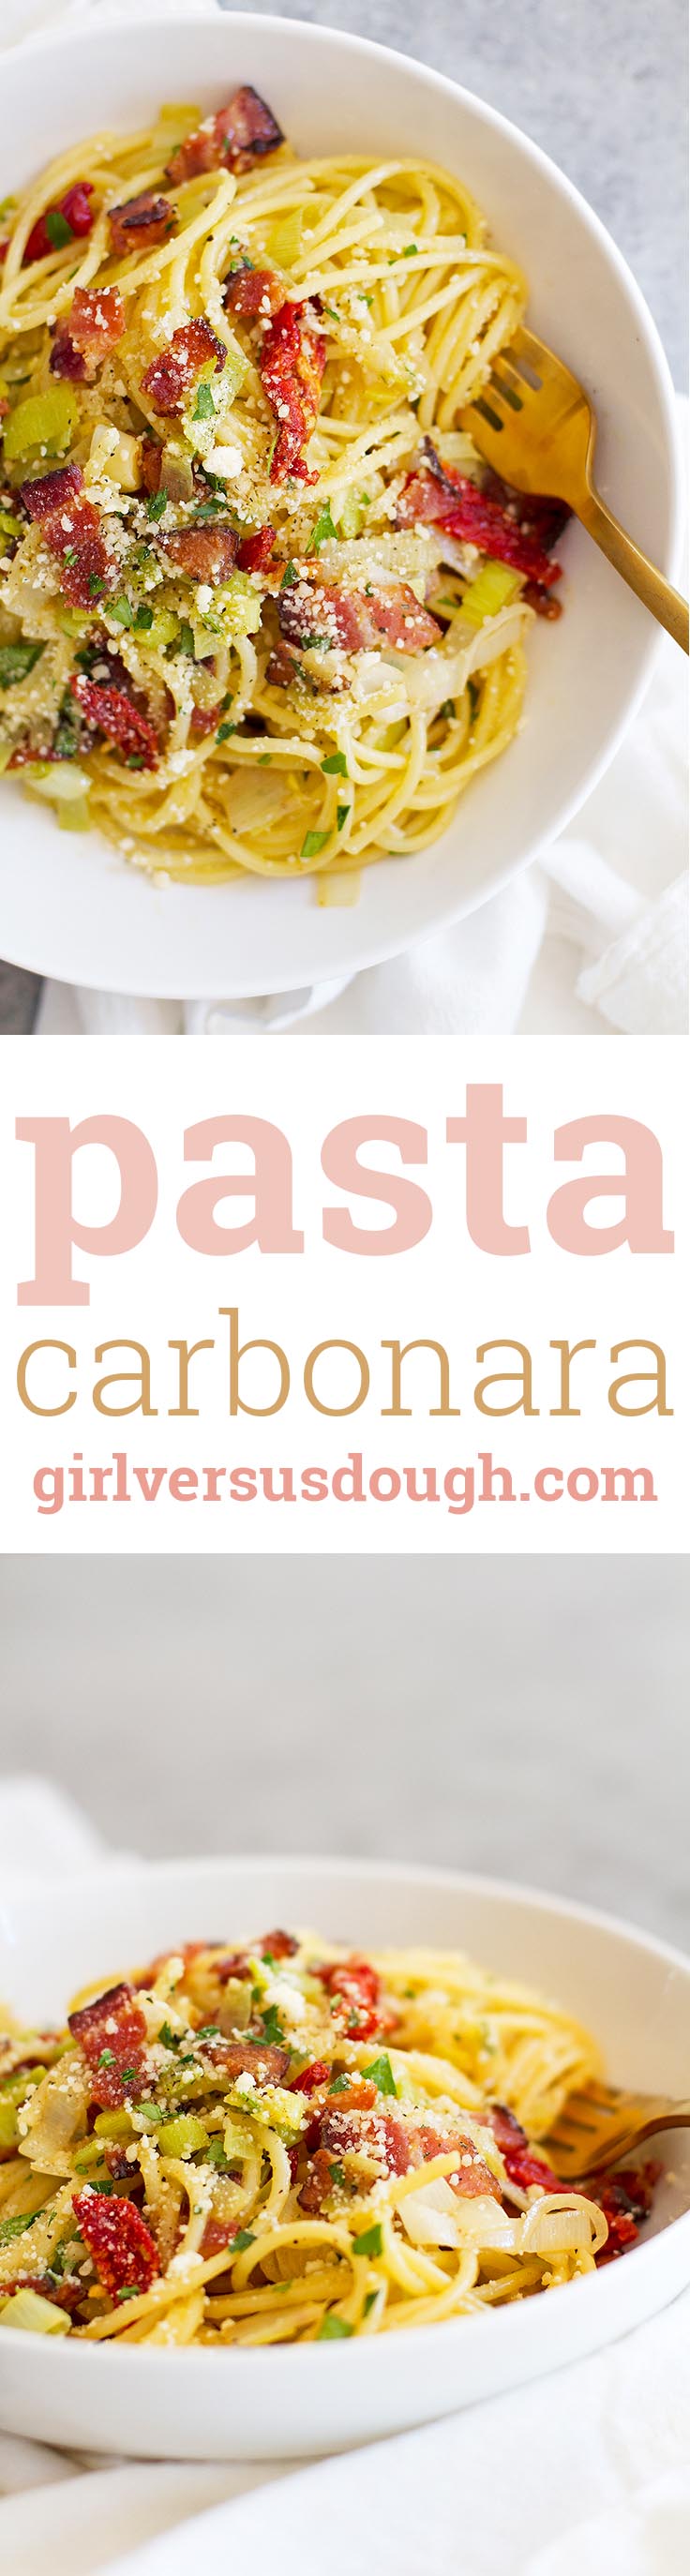 Easy Pasta Carbonara with Leeks and Sun-Dried Tomatoes -- fresh, simple and full of flavor. Perfect for a weeknight meal! www.girlversusdough.com @girlversusdough